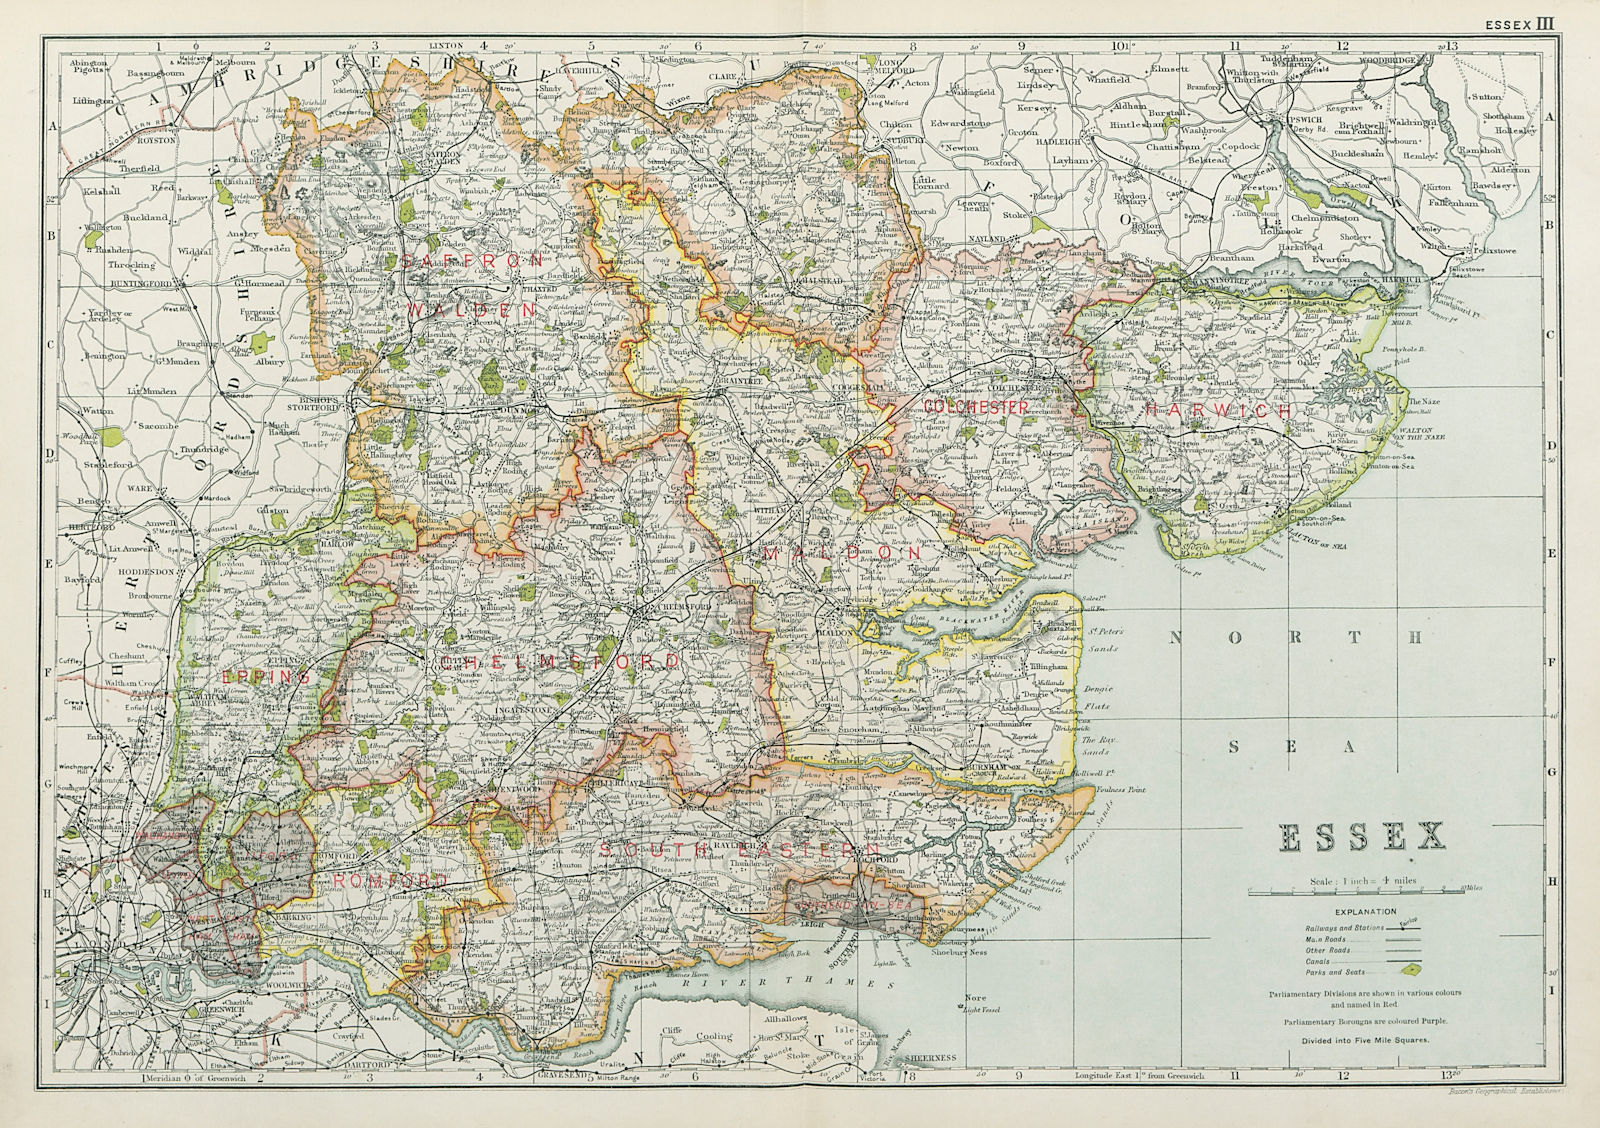 ESSEX. Showing Parliamentary divisions, boroughs & parks. BACON 1920 old map